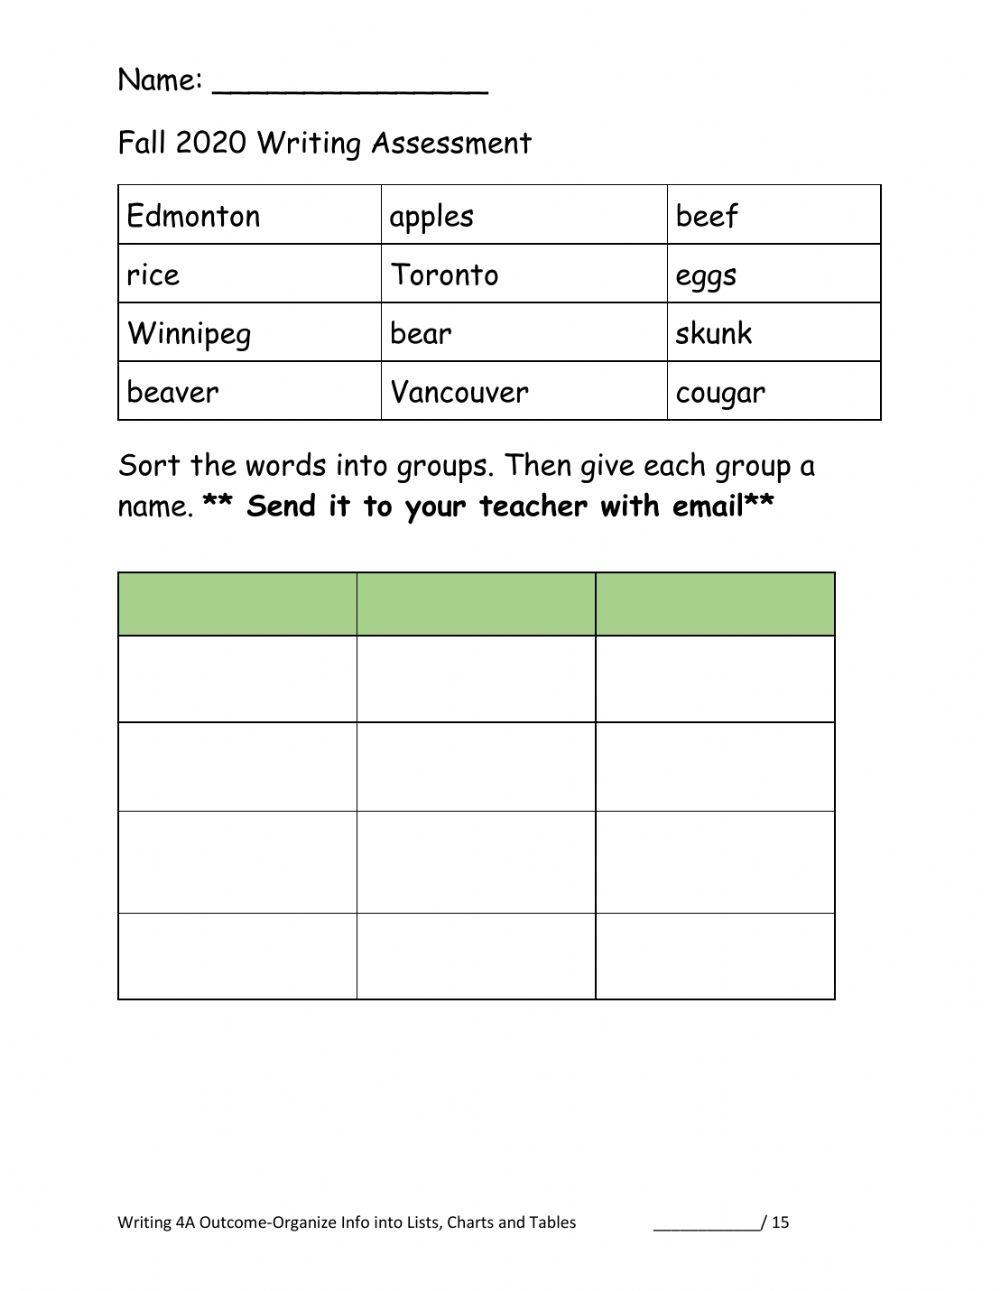 Writing -Organize into lists charts tables